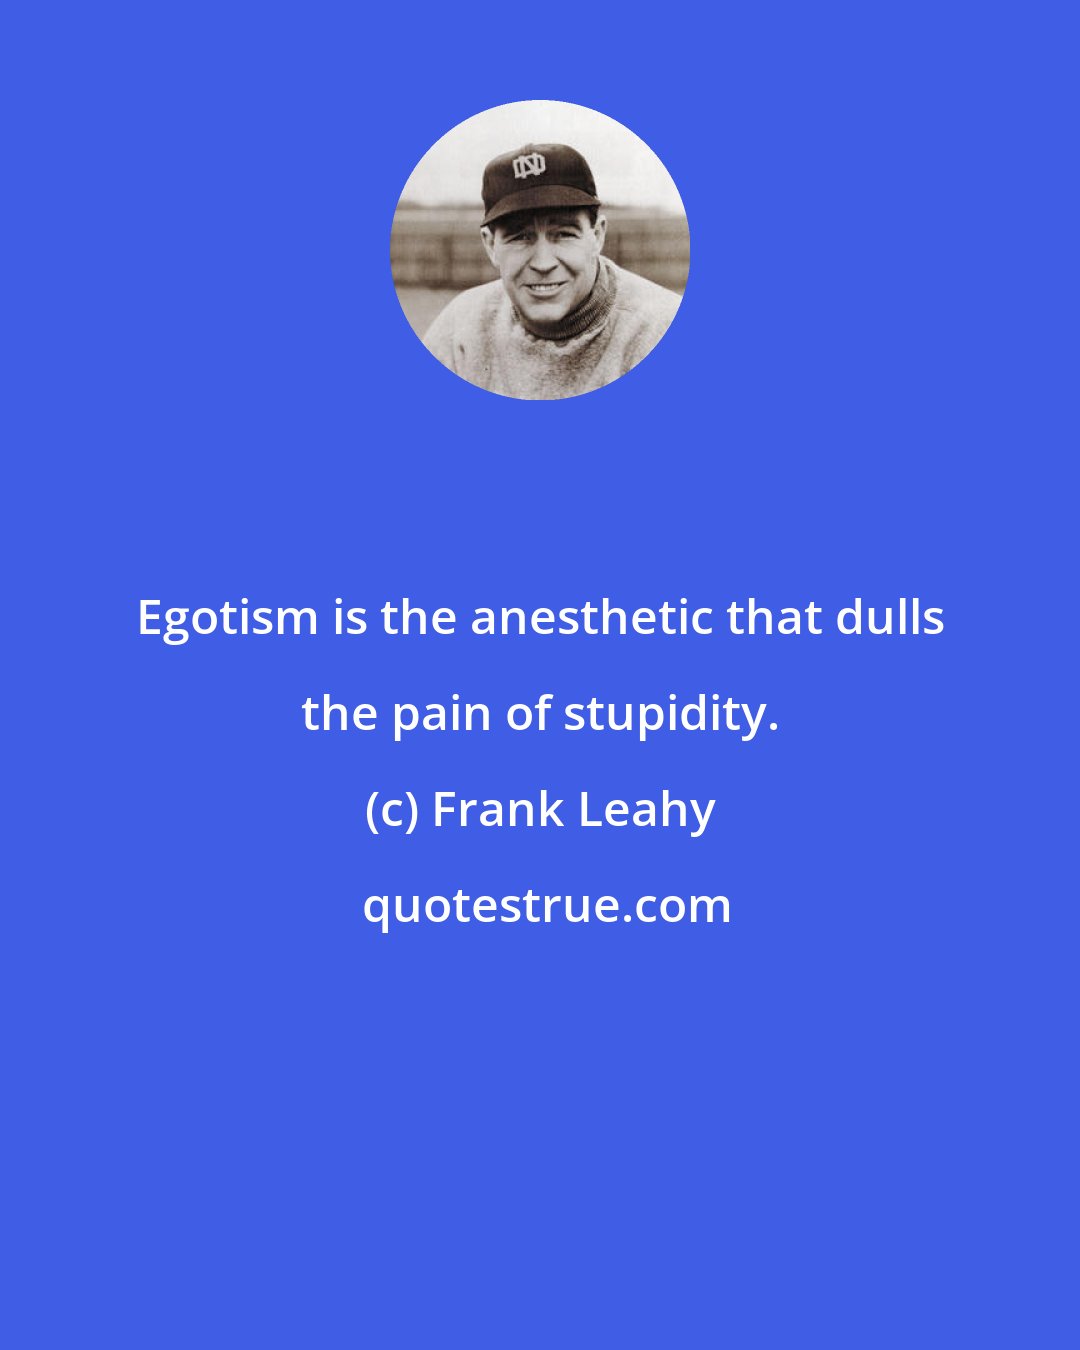 Frank Leahy: Egotism is the anesthetic that dulls the pain of stupidity.